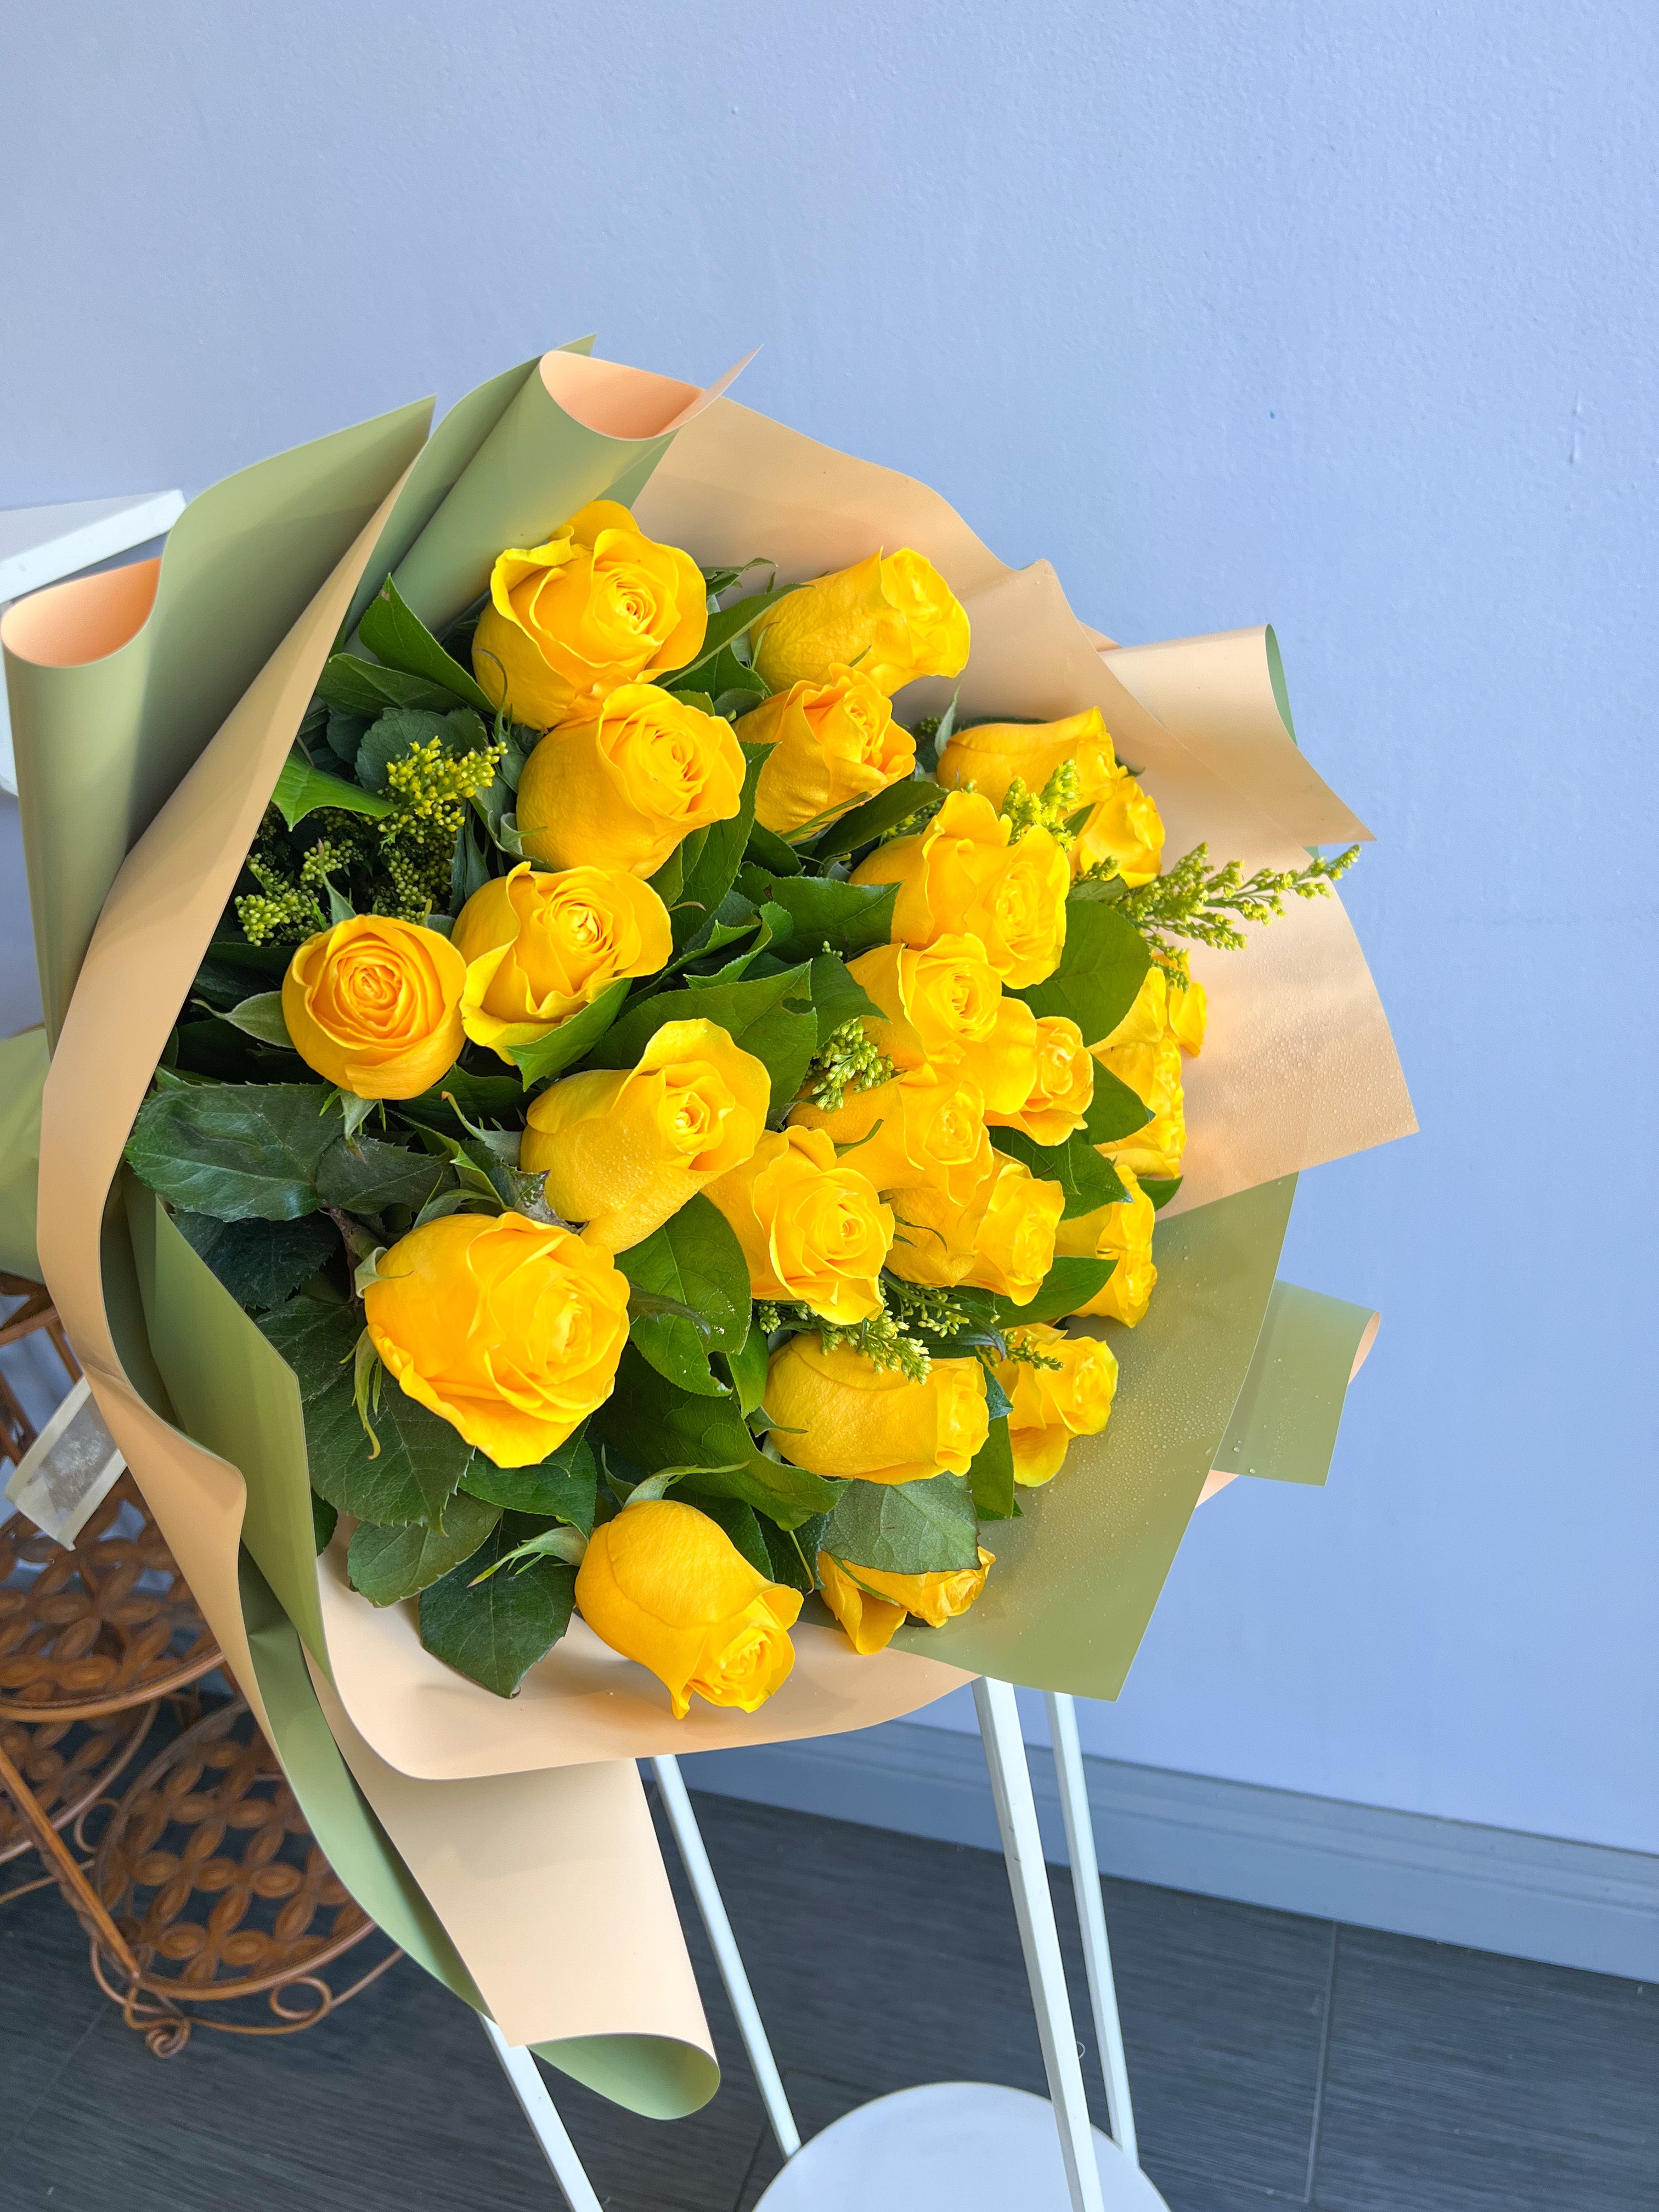 A Wrapped Bouquet of Yellow Roses